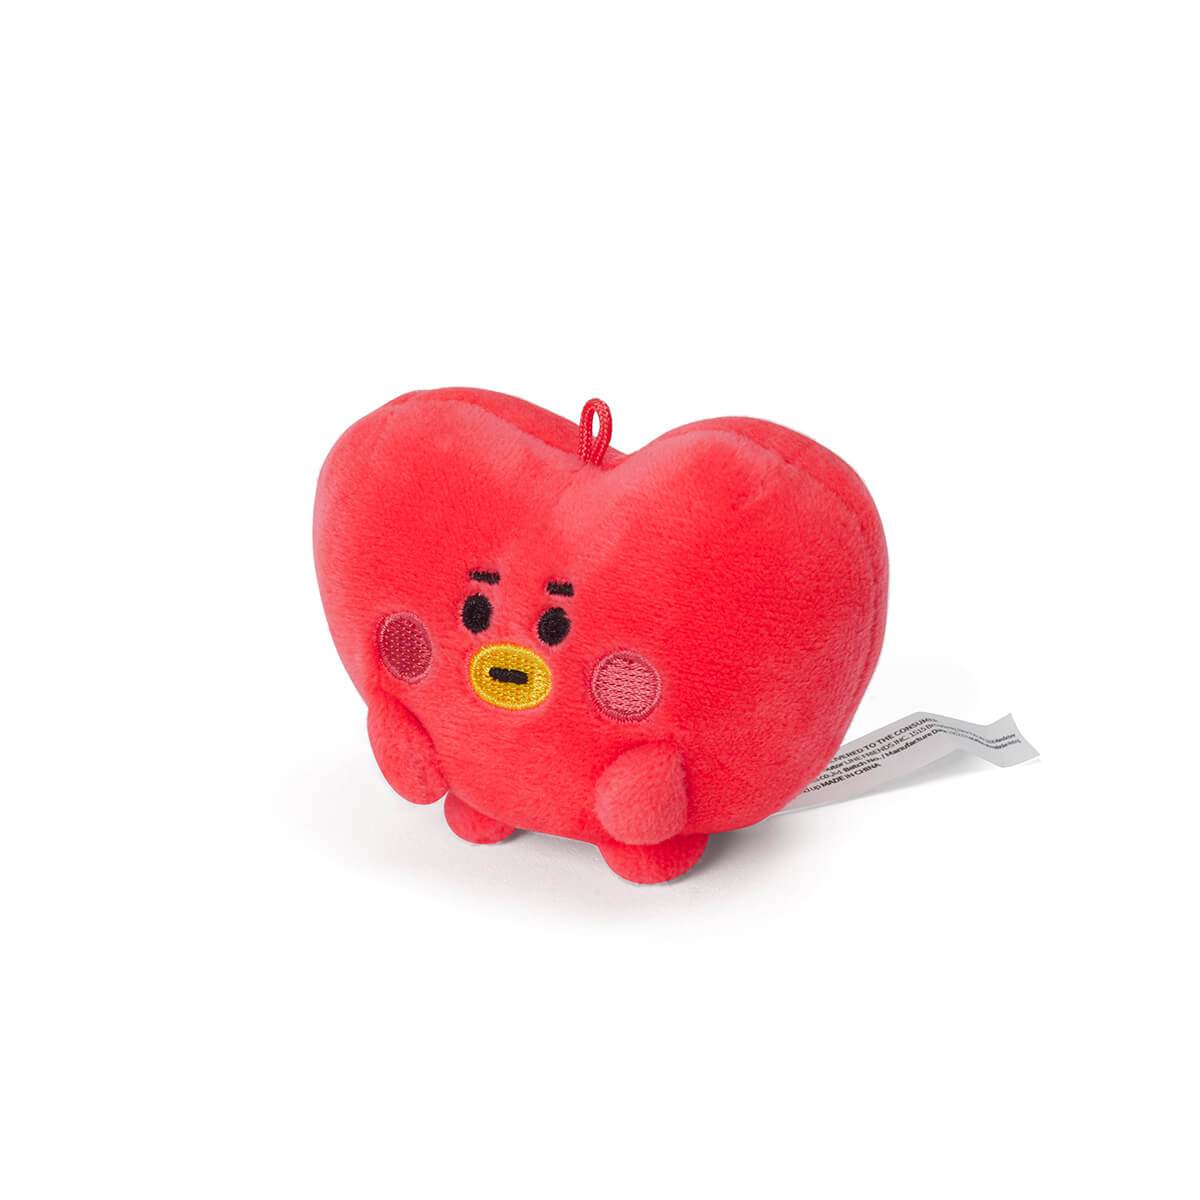 BT21 TATA Baby Pong Pong Standing 2.8 inch